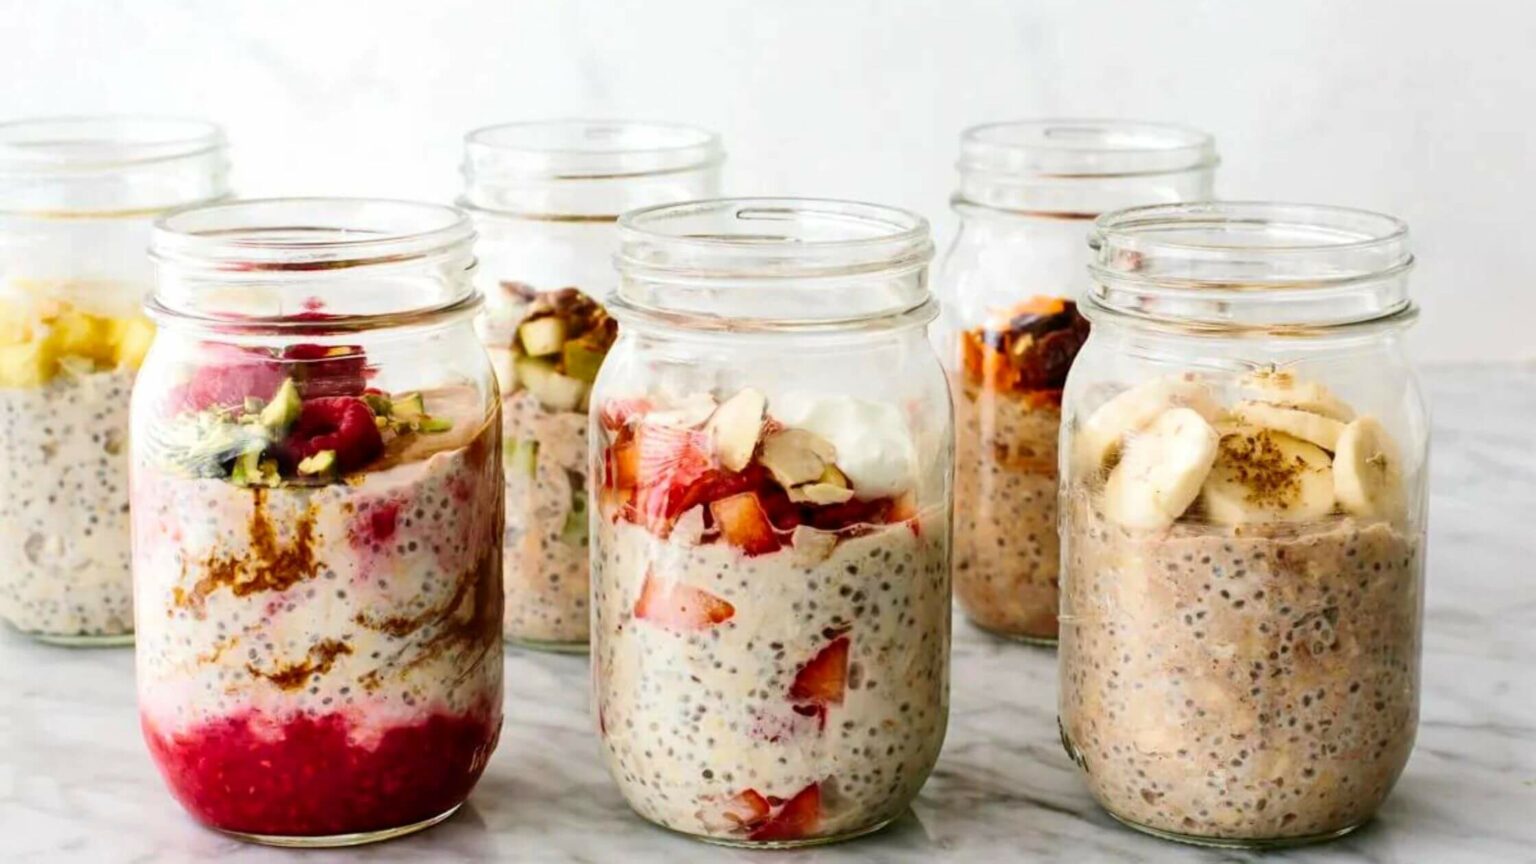 Healthy Overnight Oats Recipe For Weight Loss - Flat Stomach Foods!